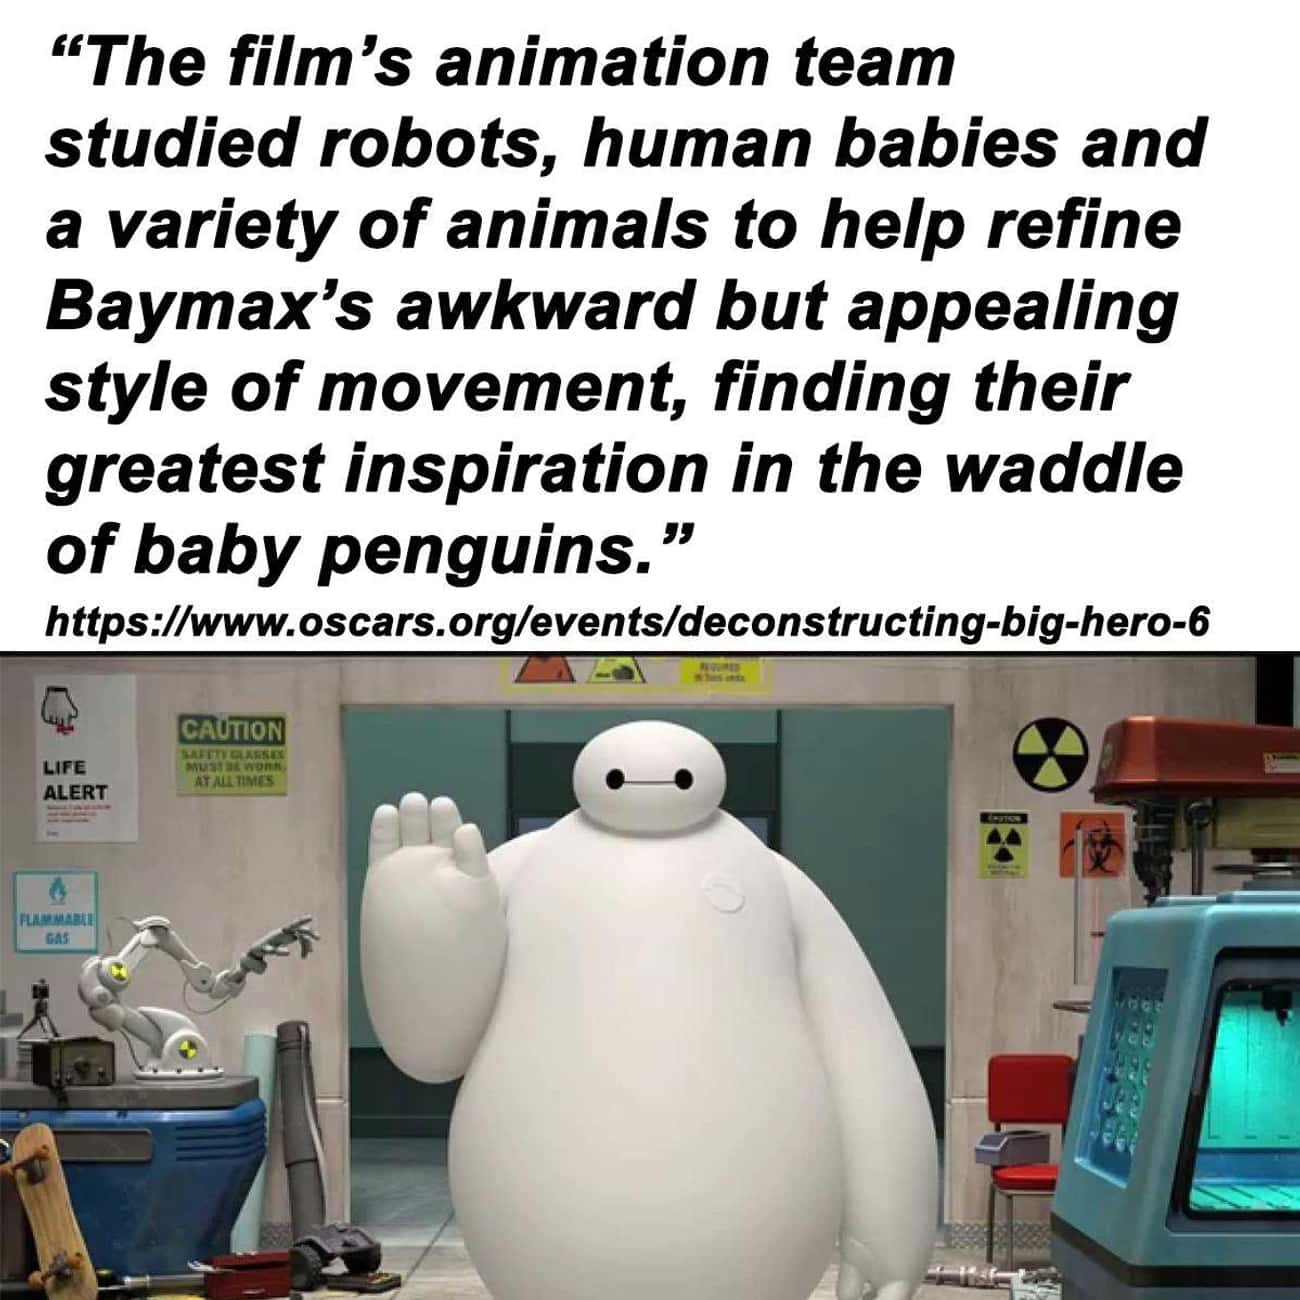 Baymax Is Greatly Inspired By Baby Penguins